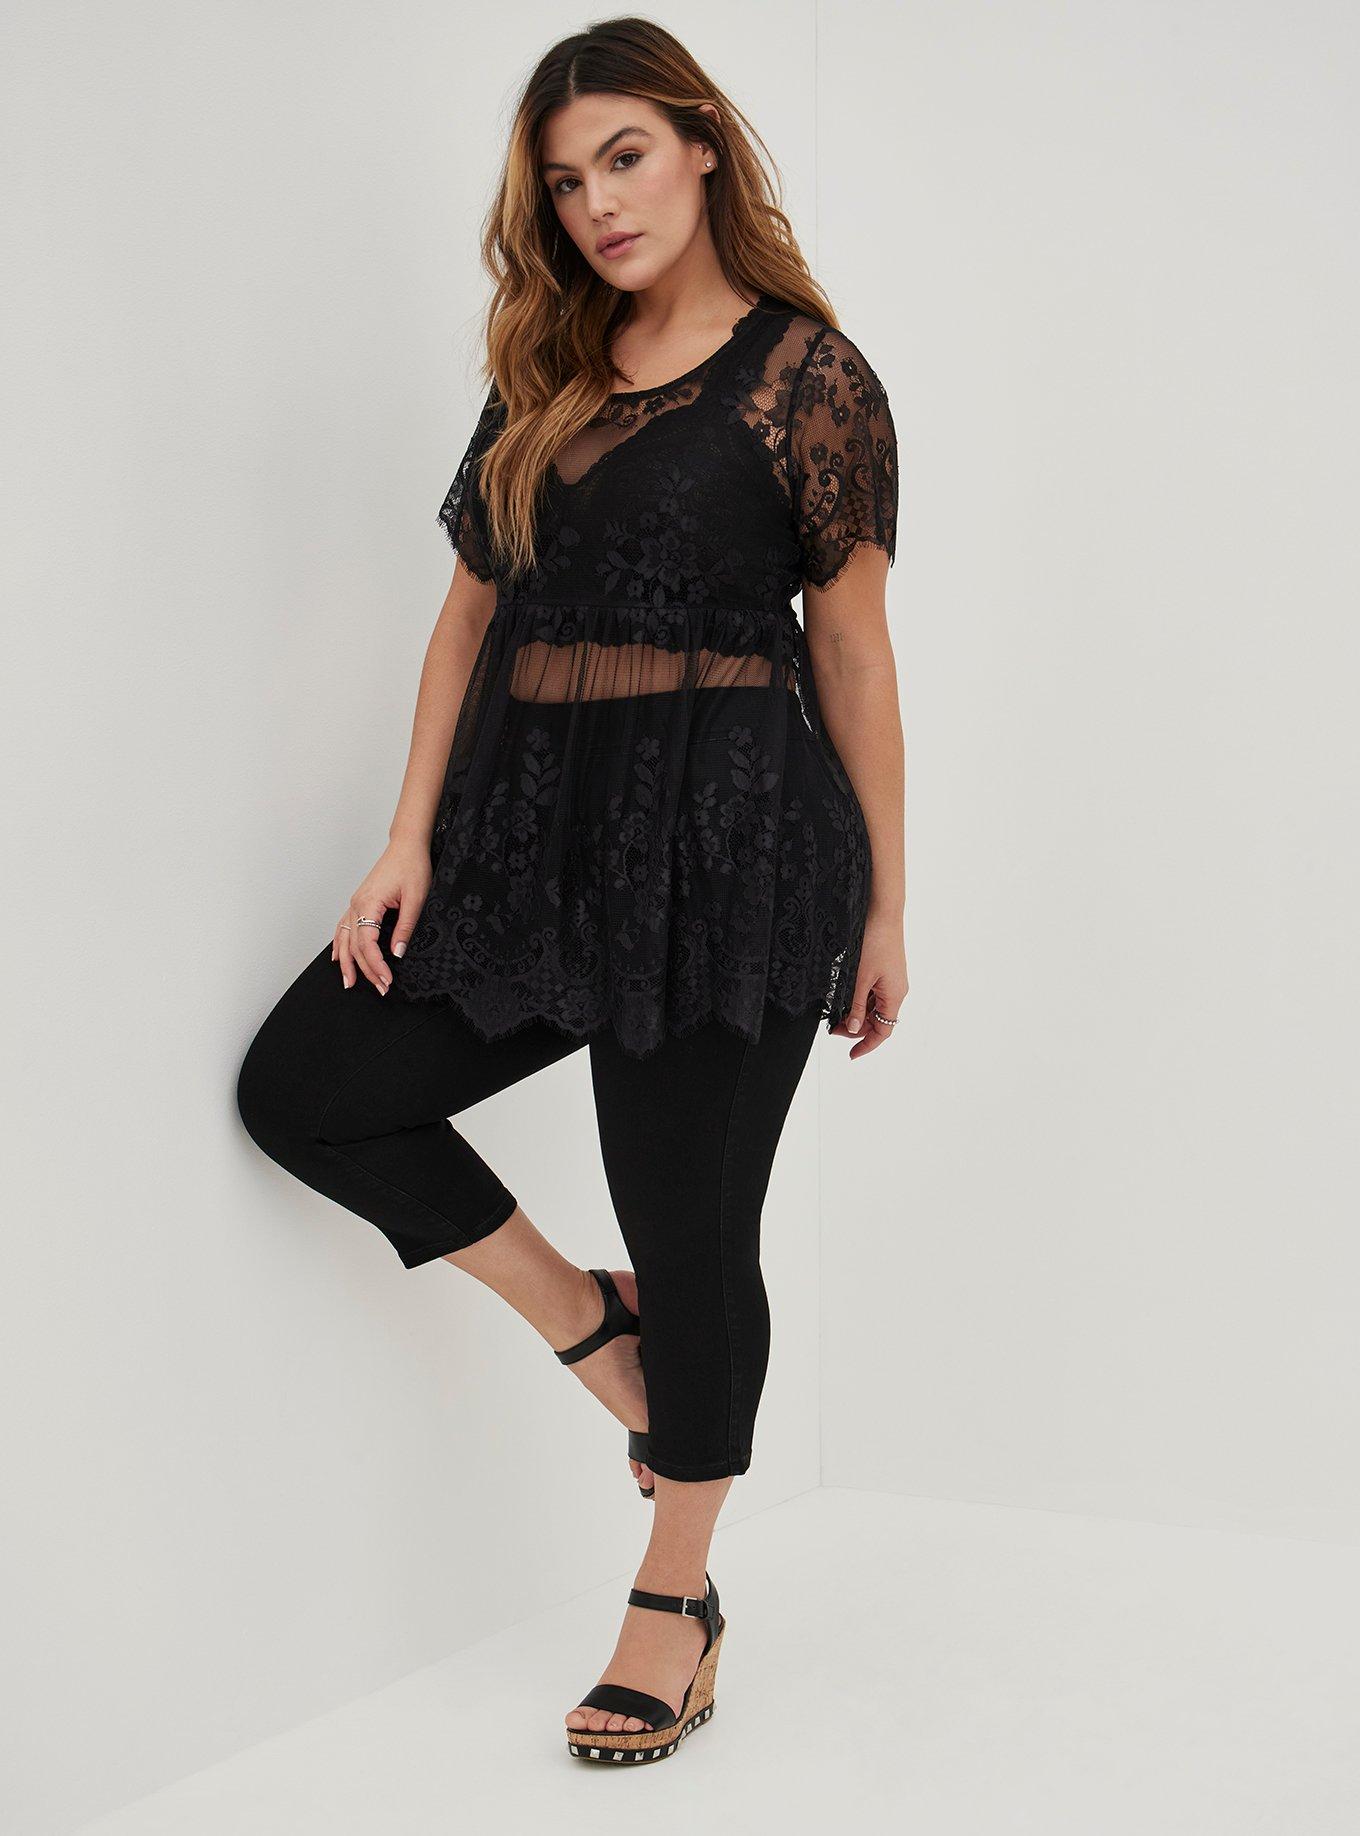 Torrid black blouse with key hole front and back and black lace sleeves!